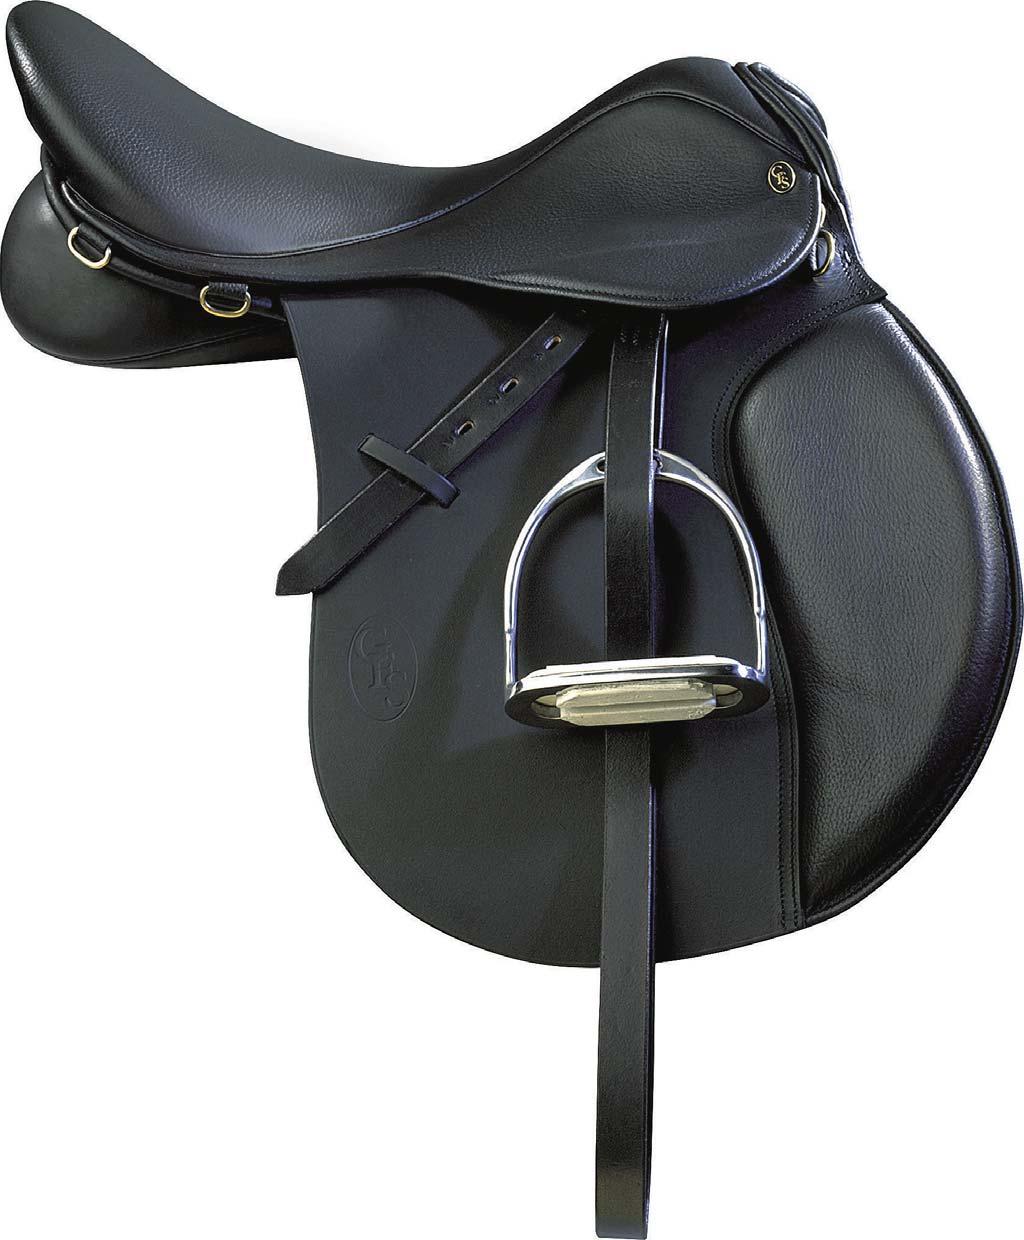 Accommodates a wide range of stirrup length variance making the Pro Event suitable for a wide range of disciplines. A trusted market leader! www.gfsriding.co.uk